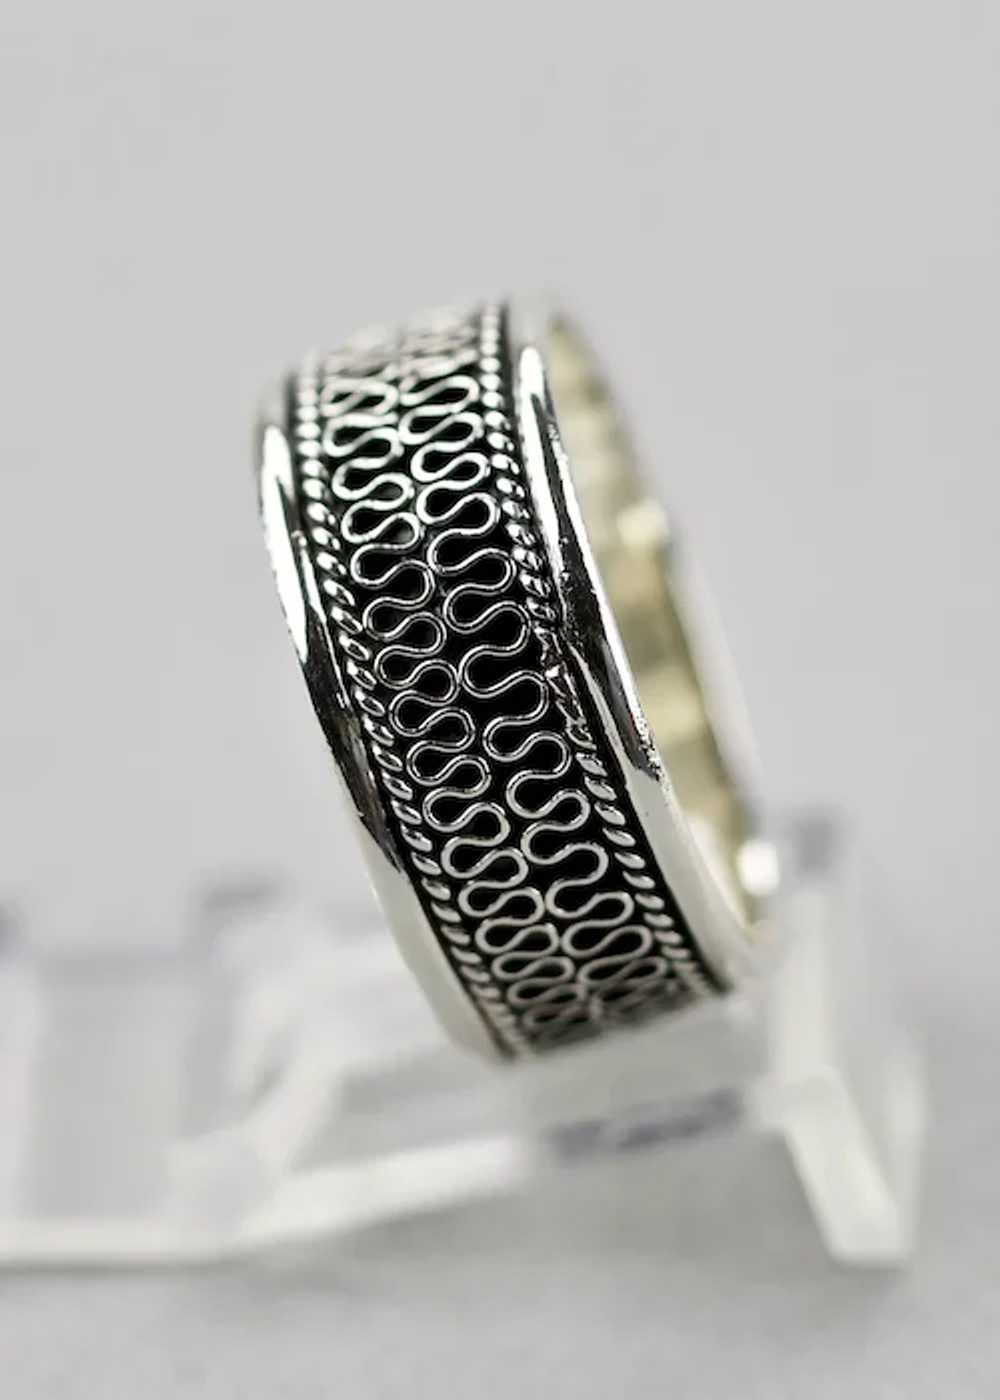 Sterling Silver Band Ring Scrolled Details Mens S… - image 6